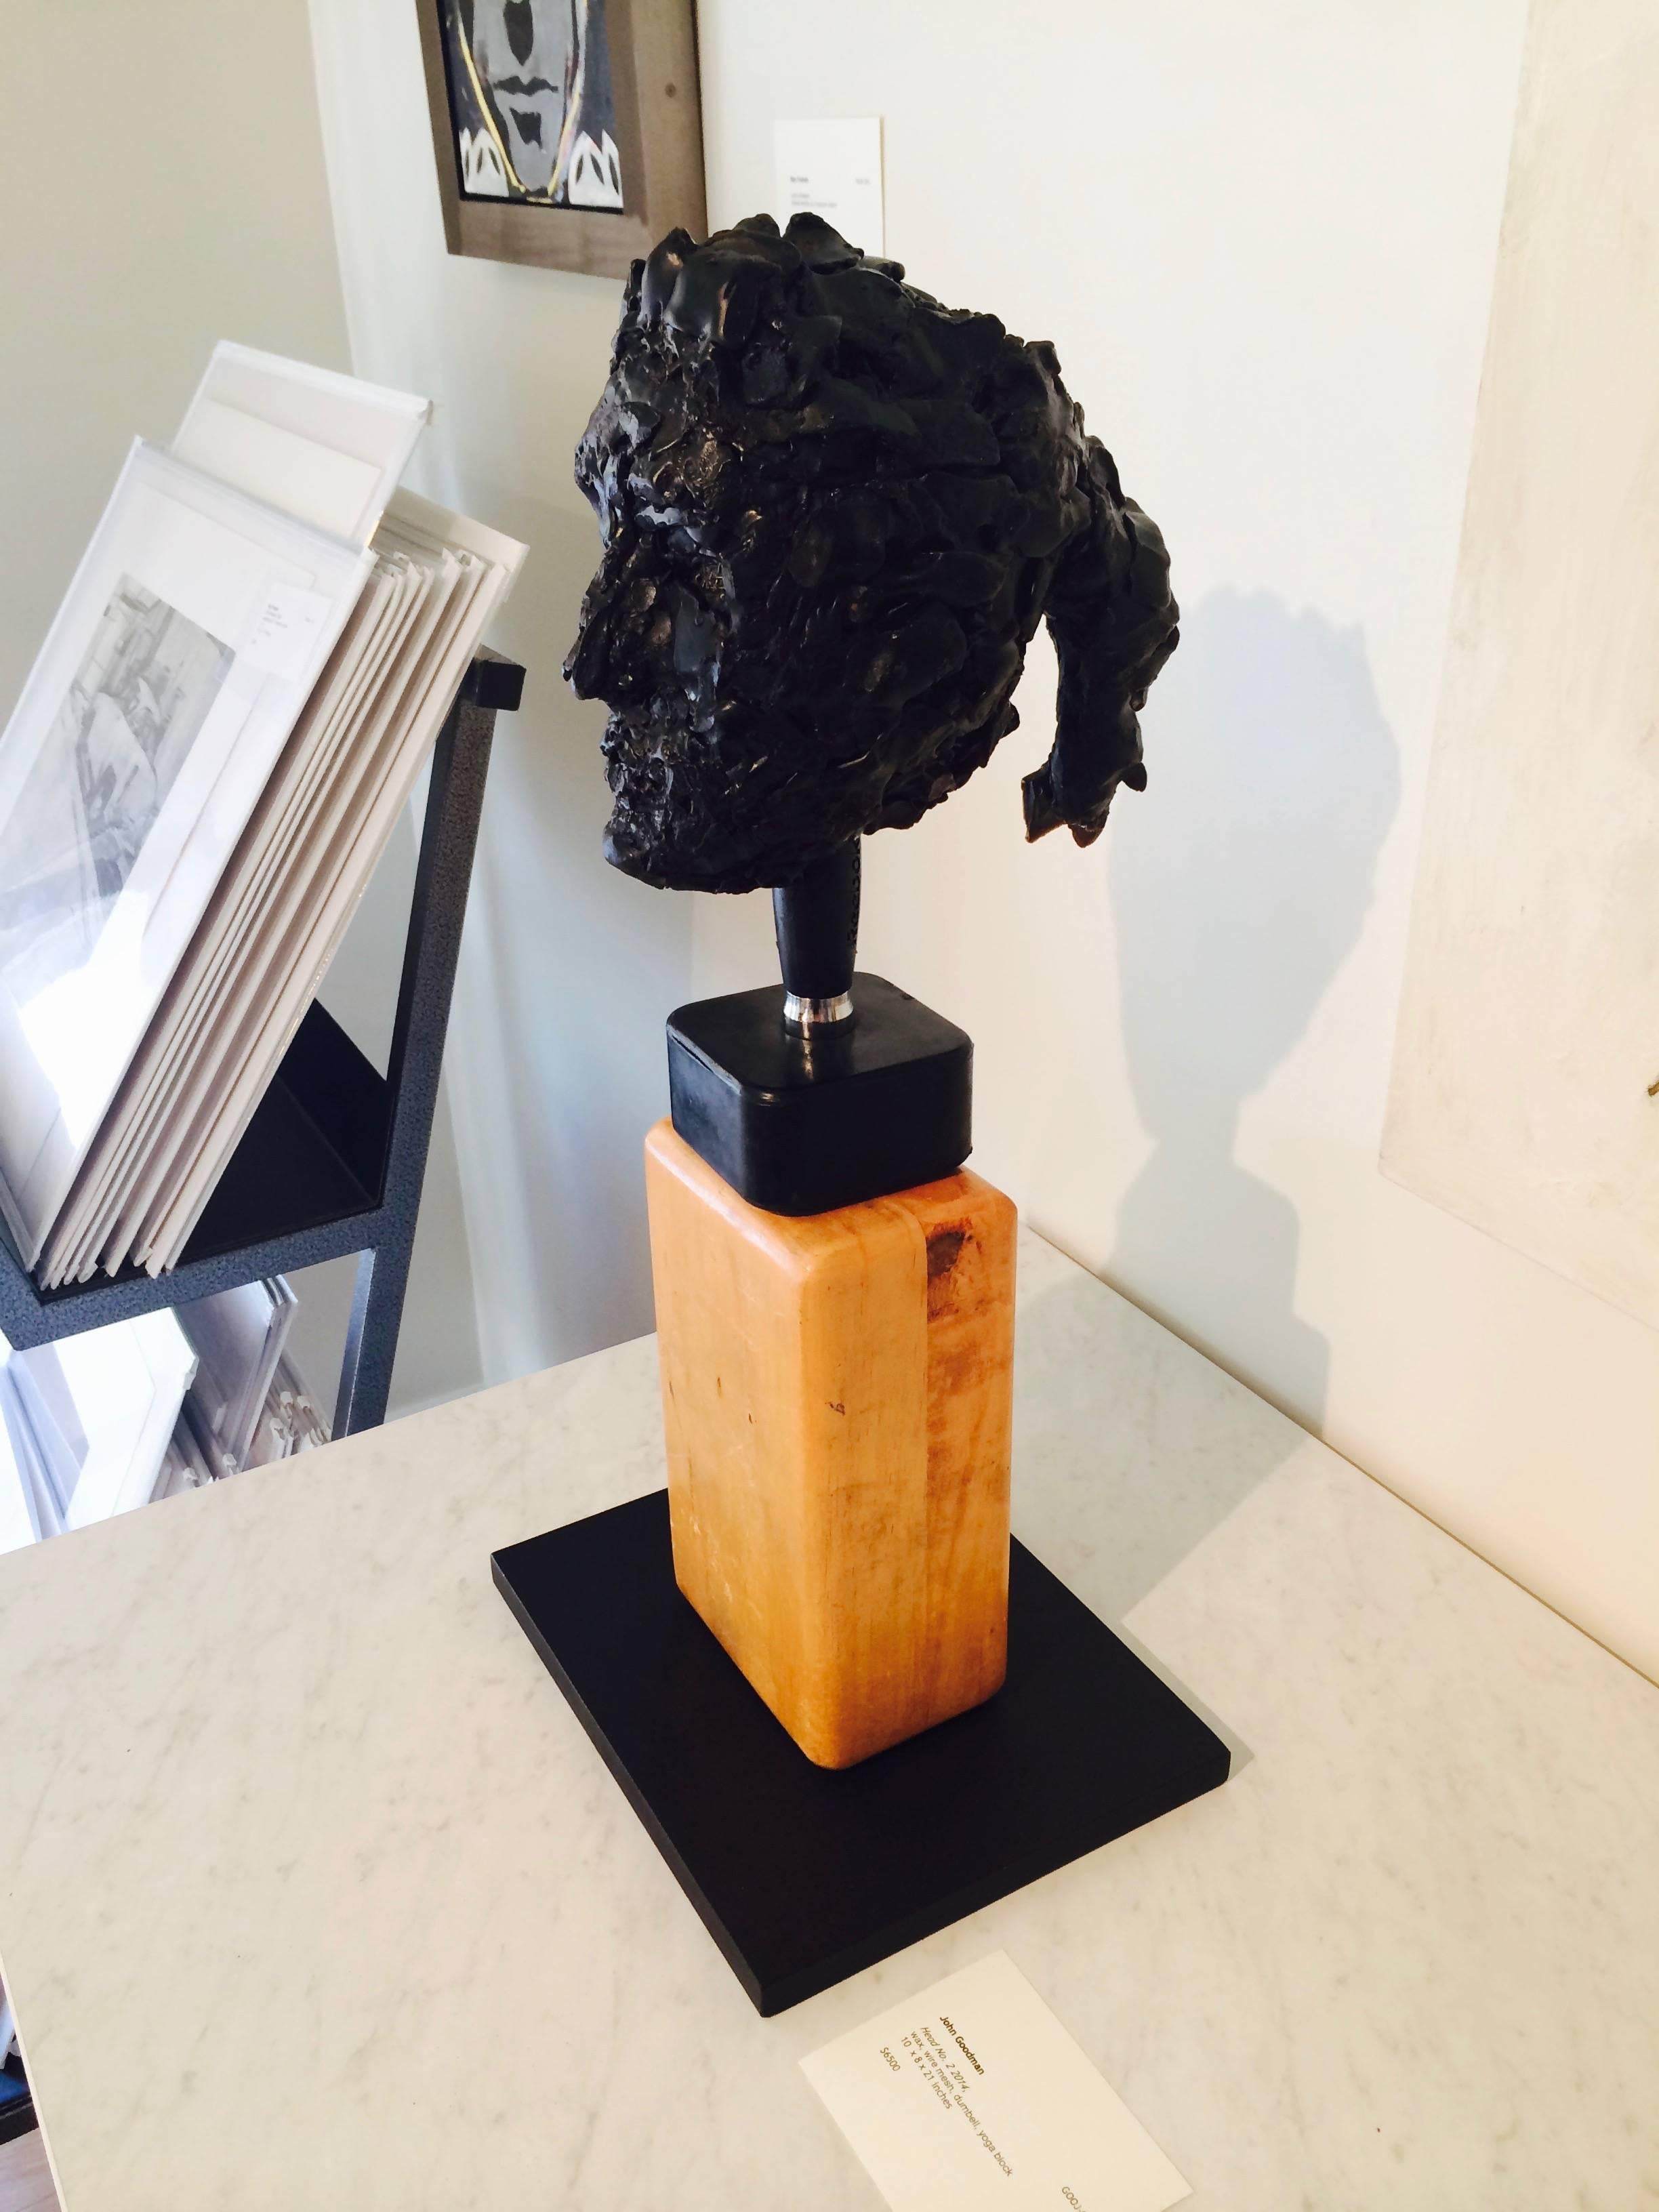 Bust / Head No. 2 2014 (with Yoga Block and Dumbell) - American Realist Sculpture by John Goodman